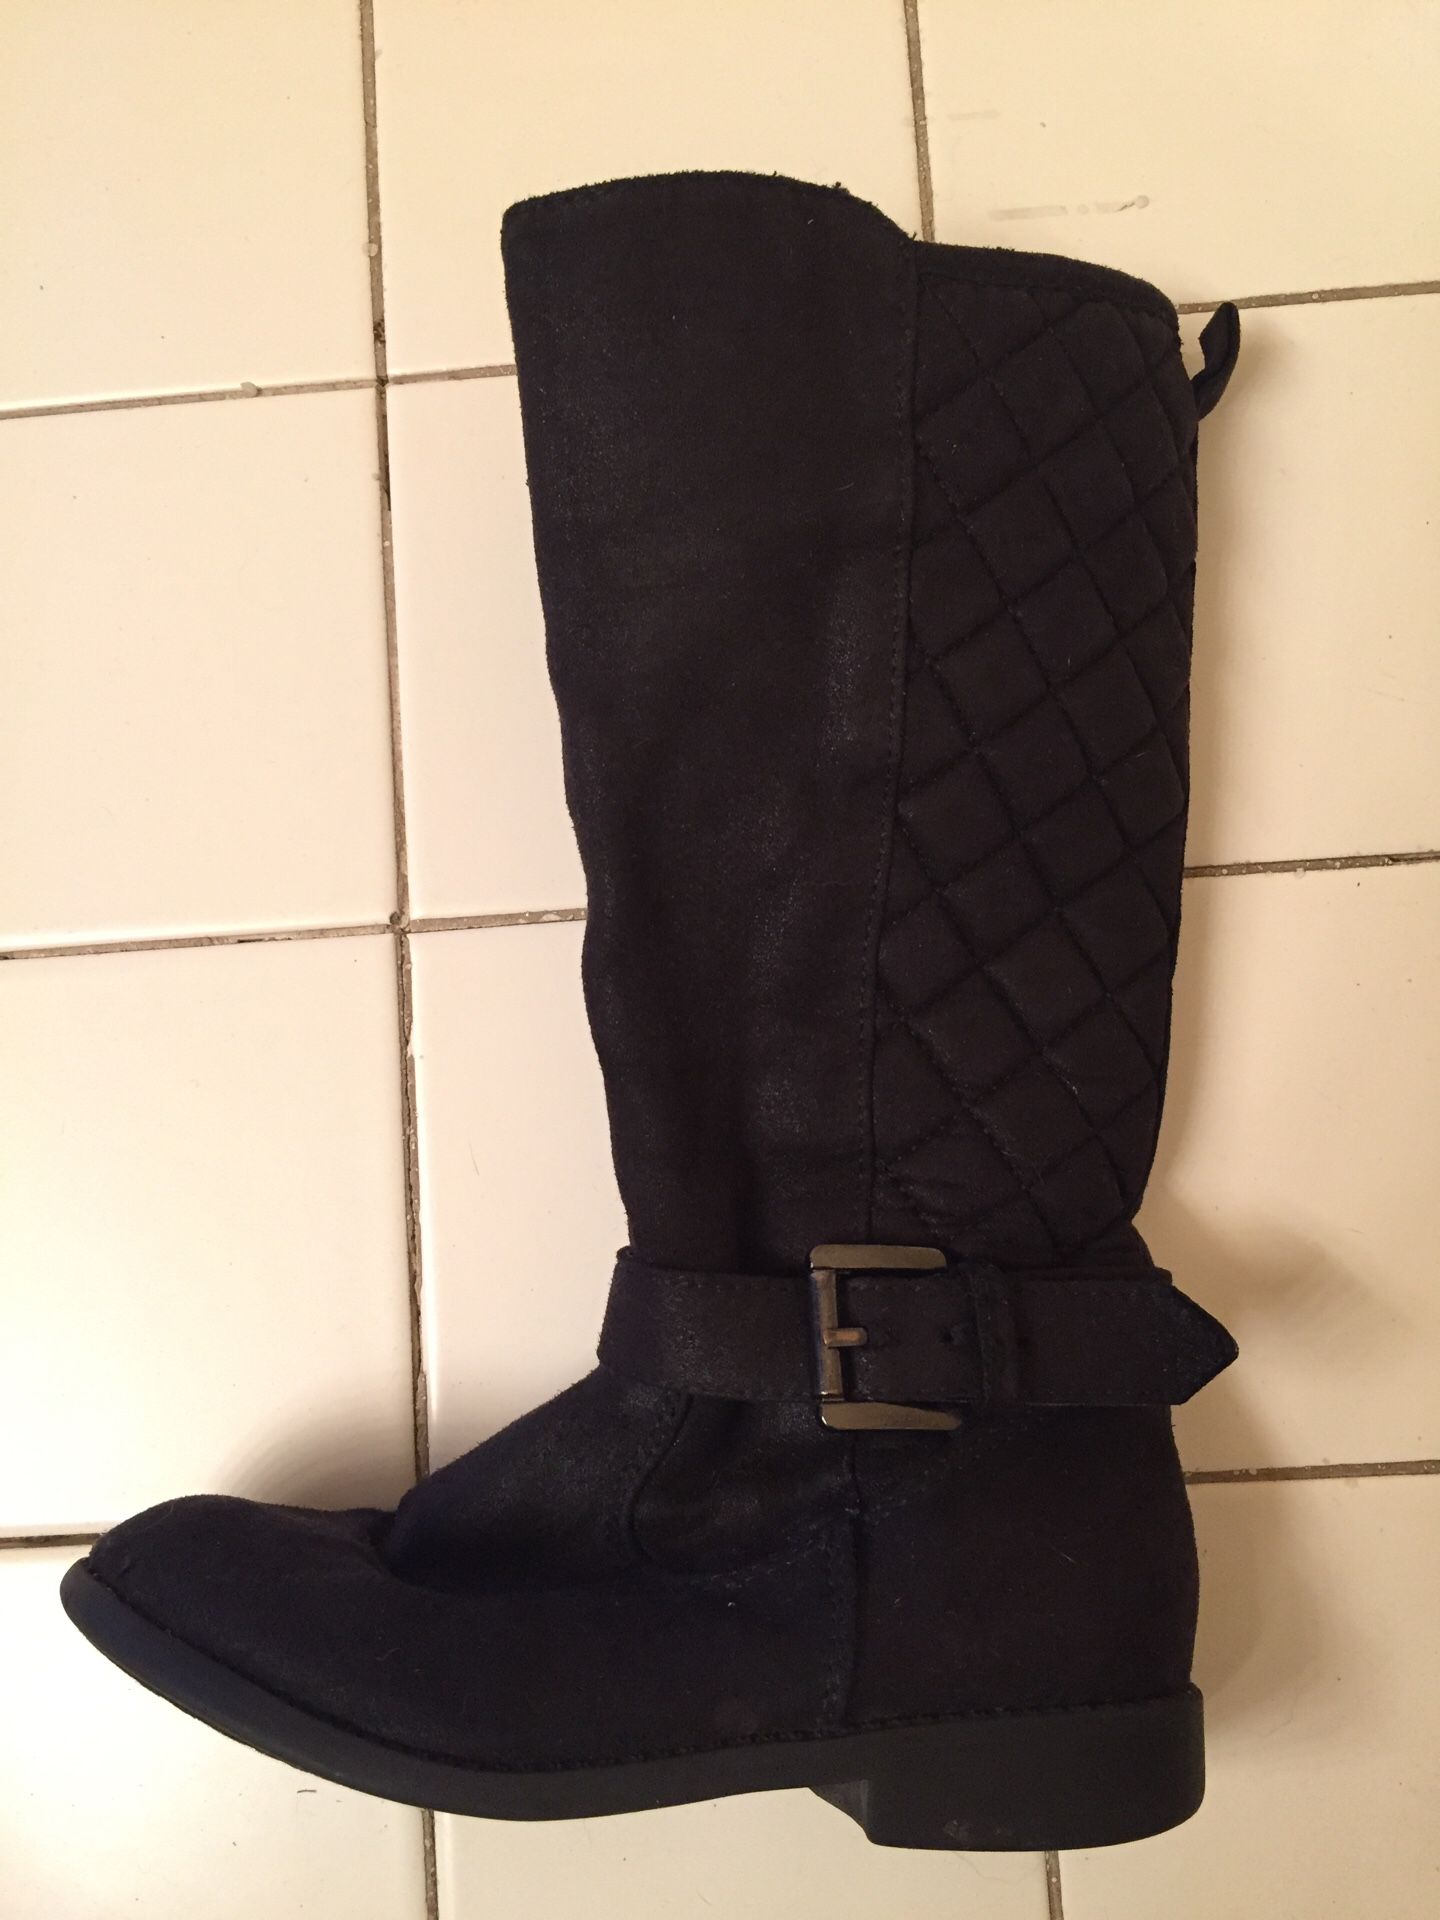 Girl boots size 10 1/2